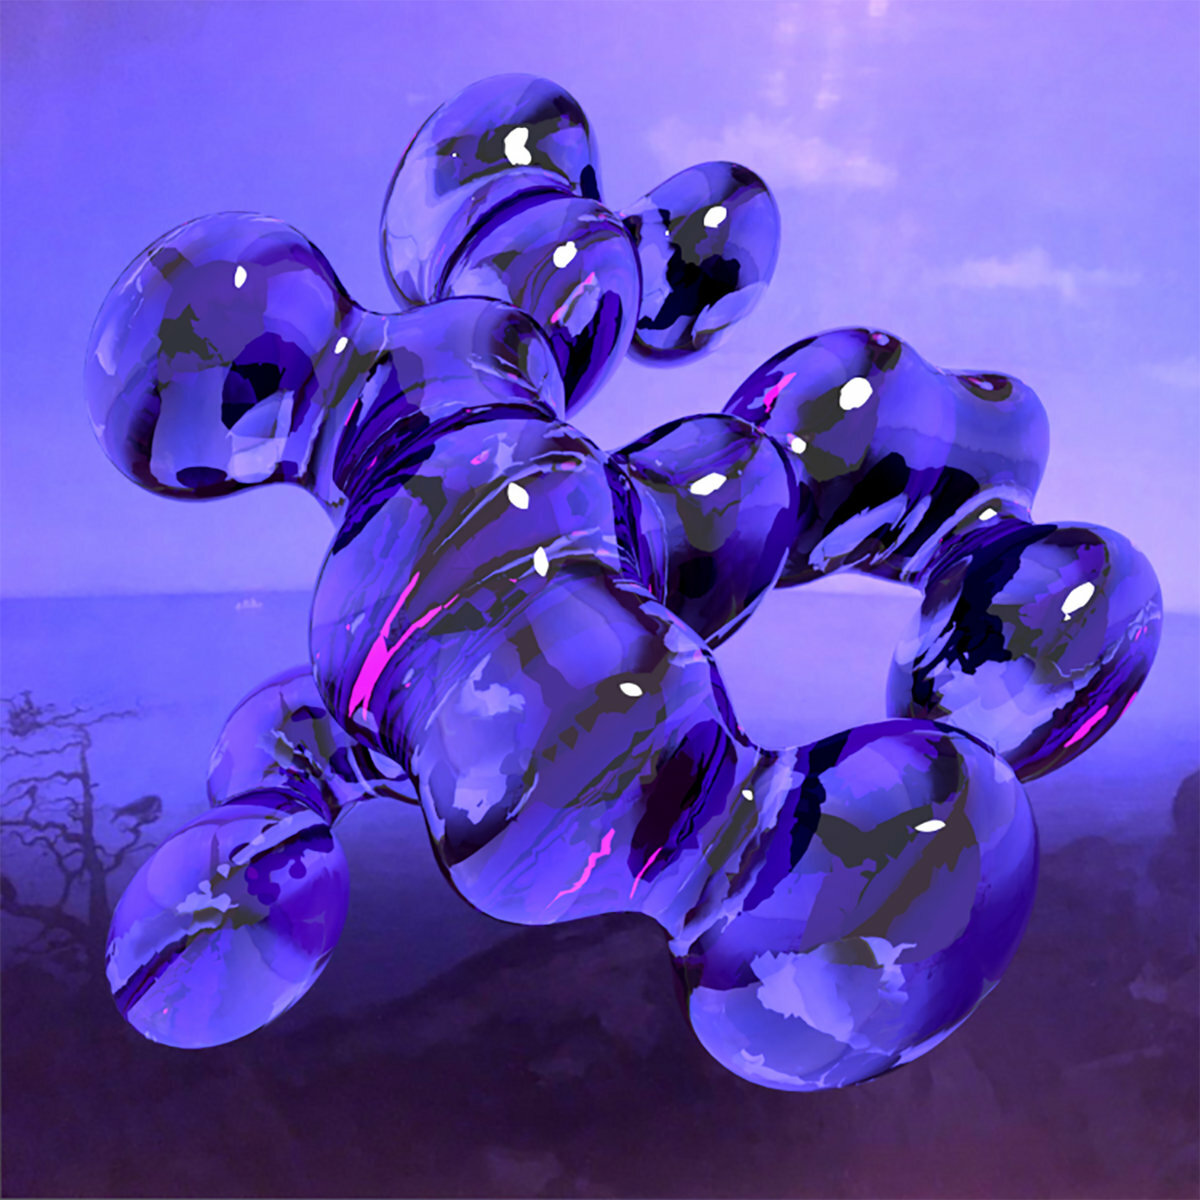 Fluid orbs merge together against a purple background.